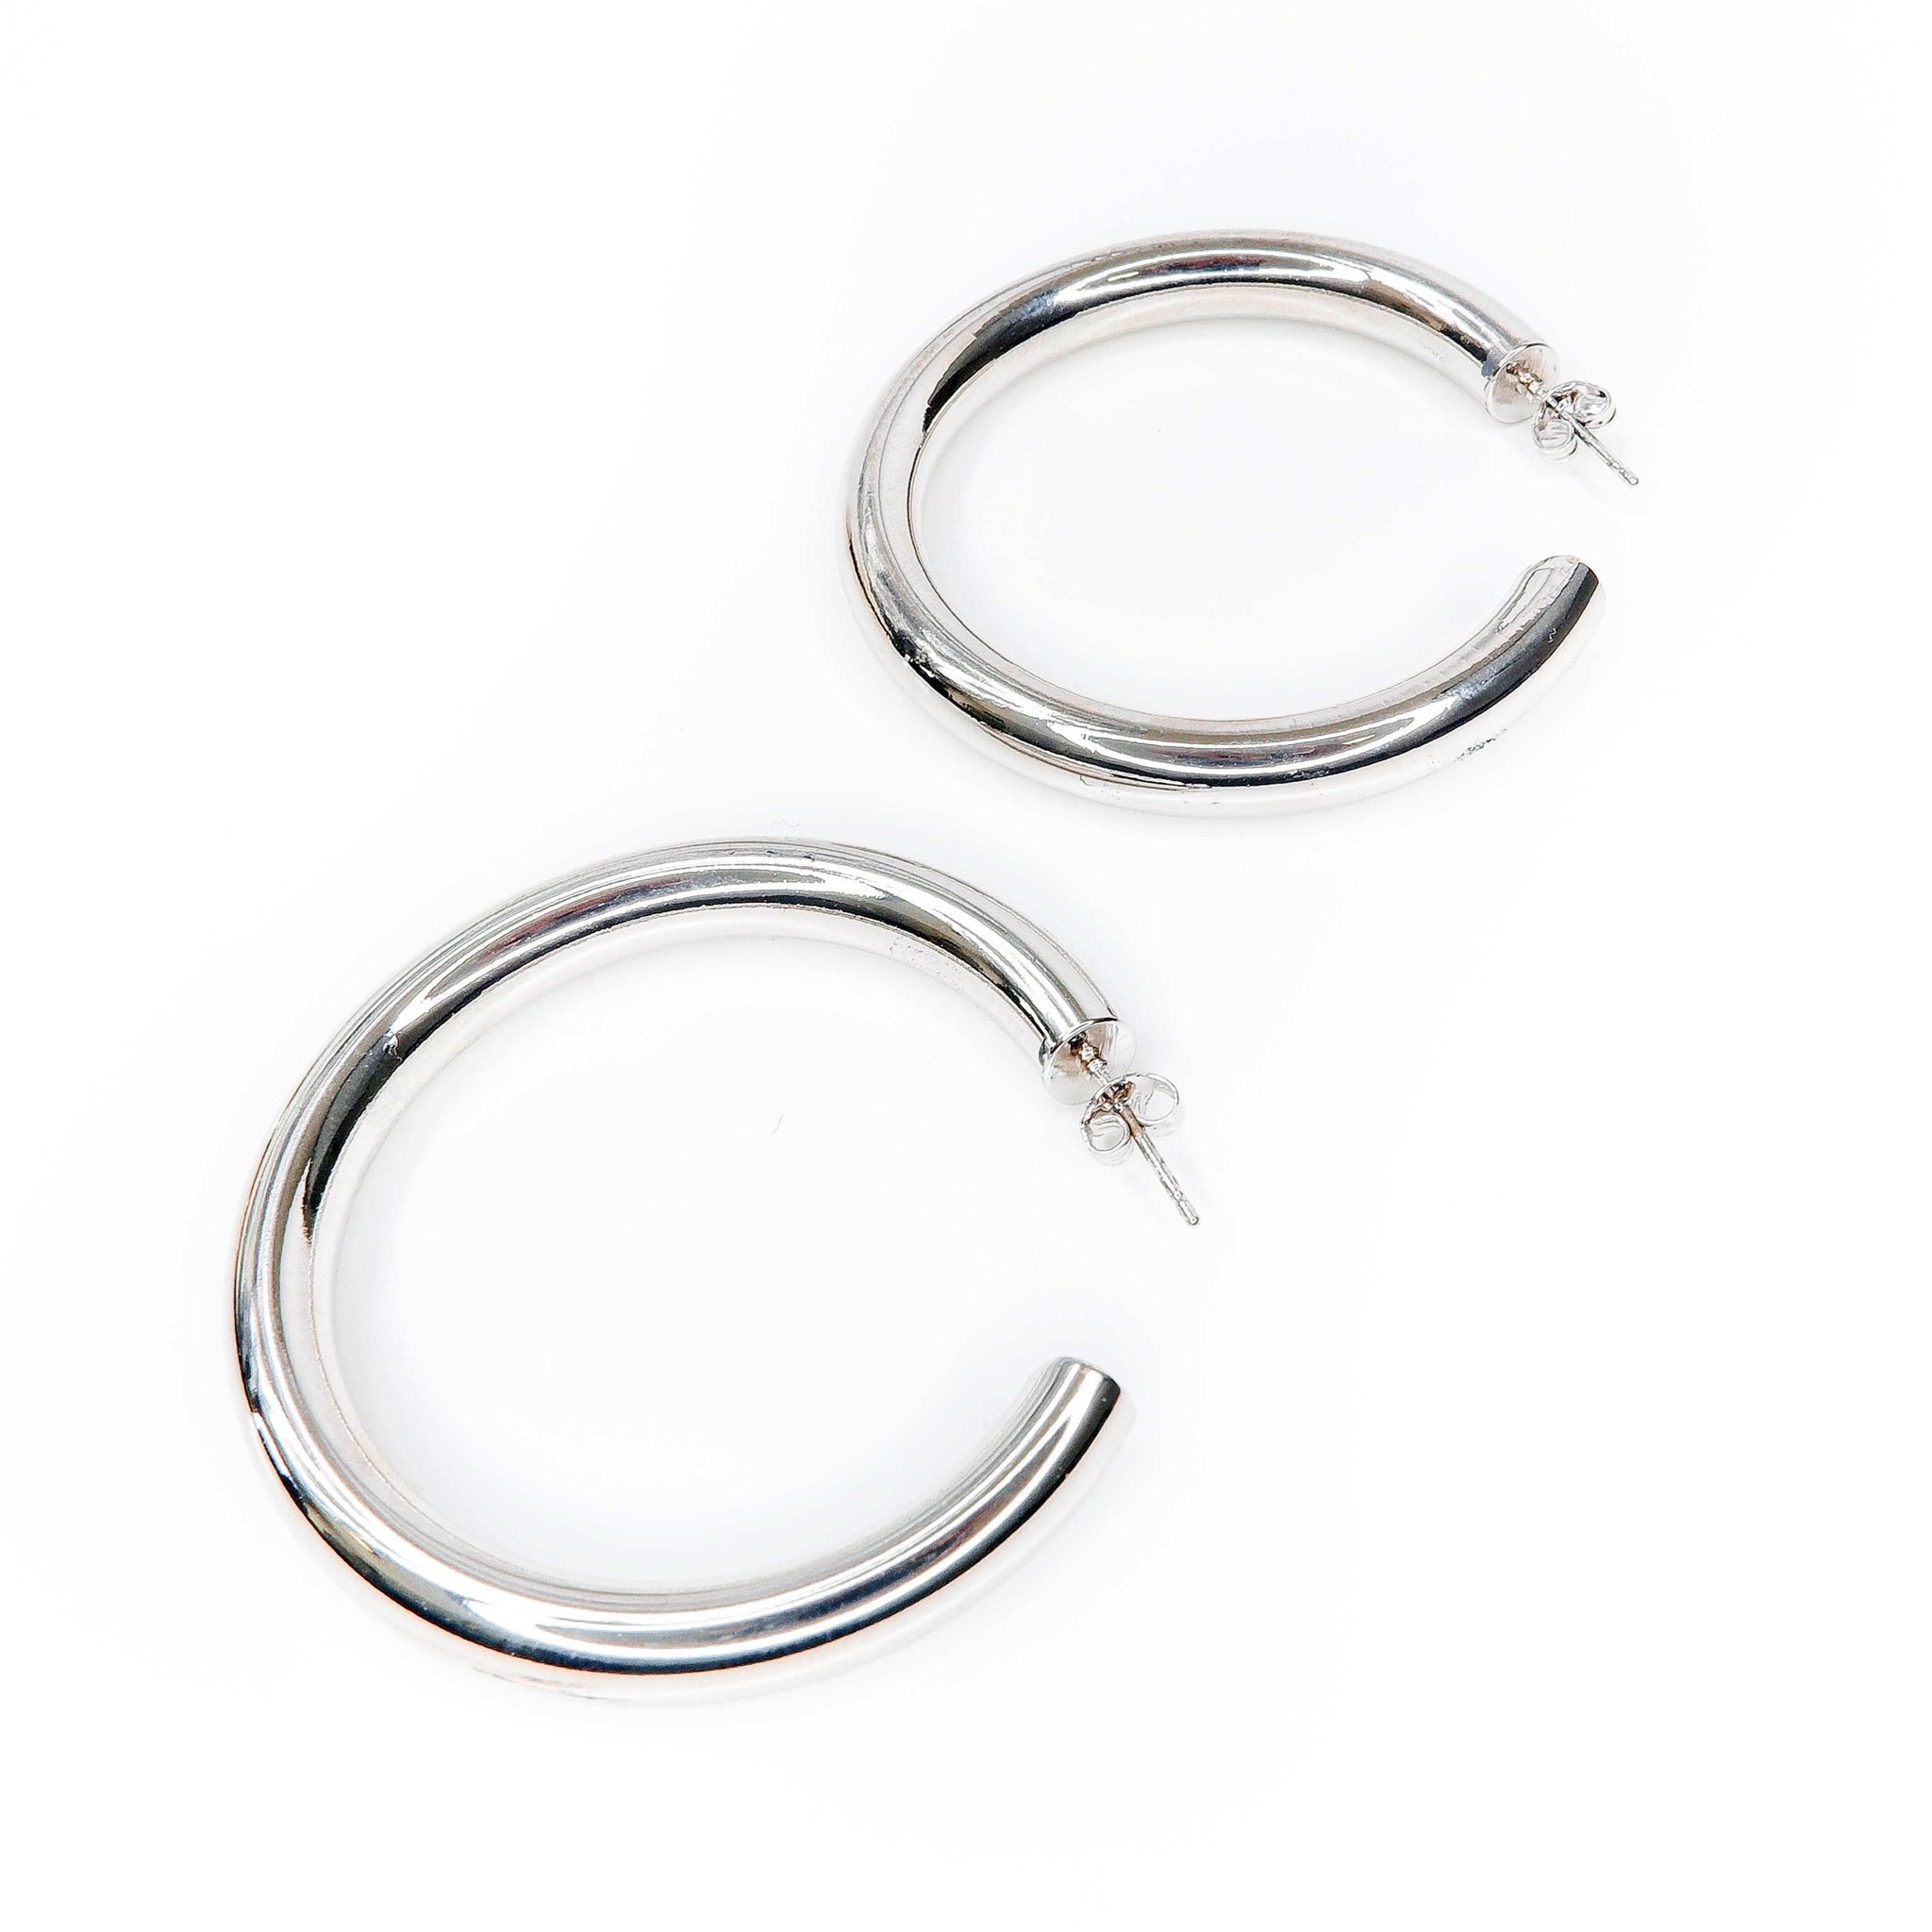 Thick 24k white gold plated hoops 